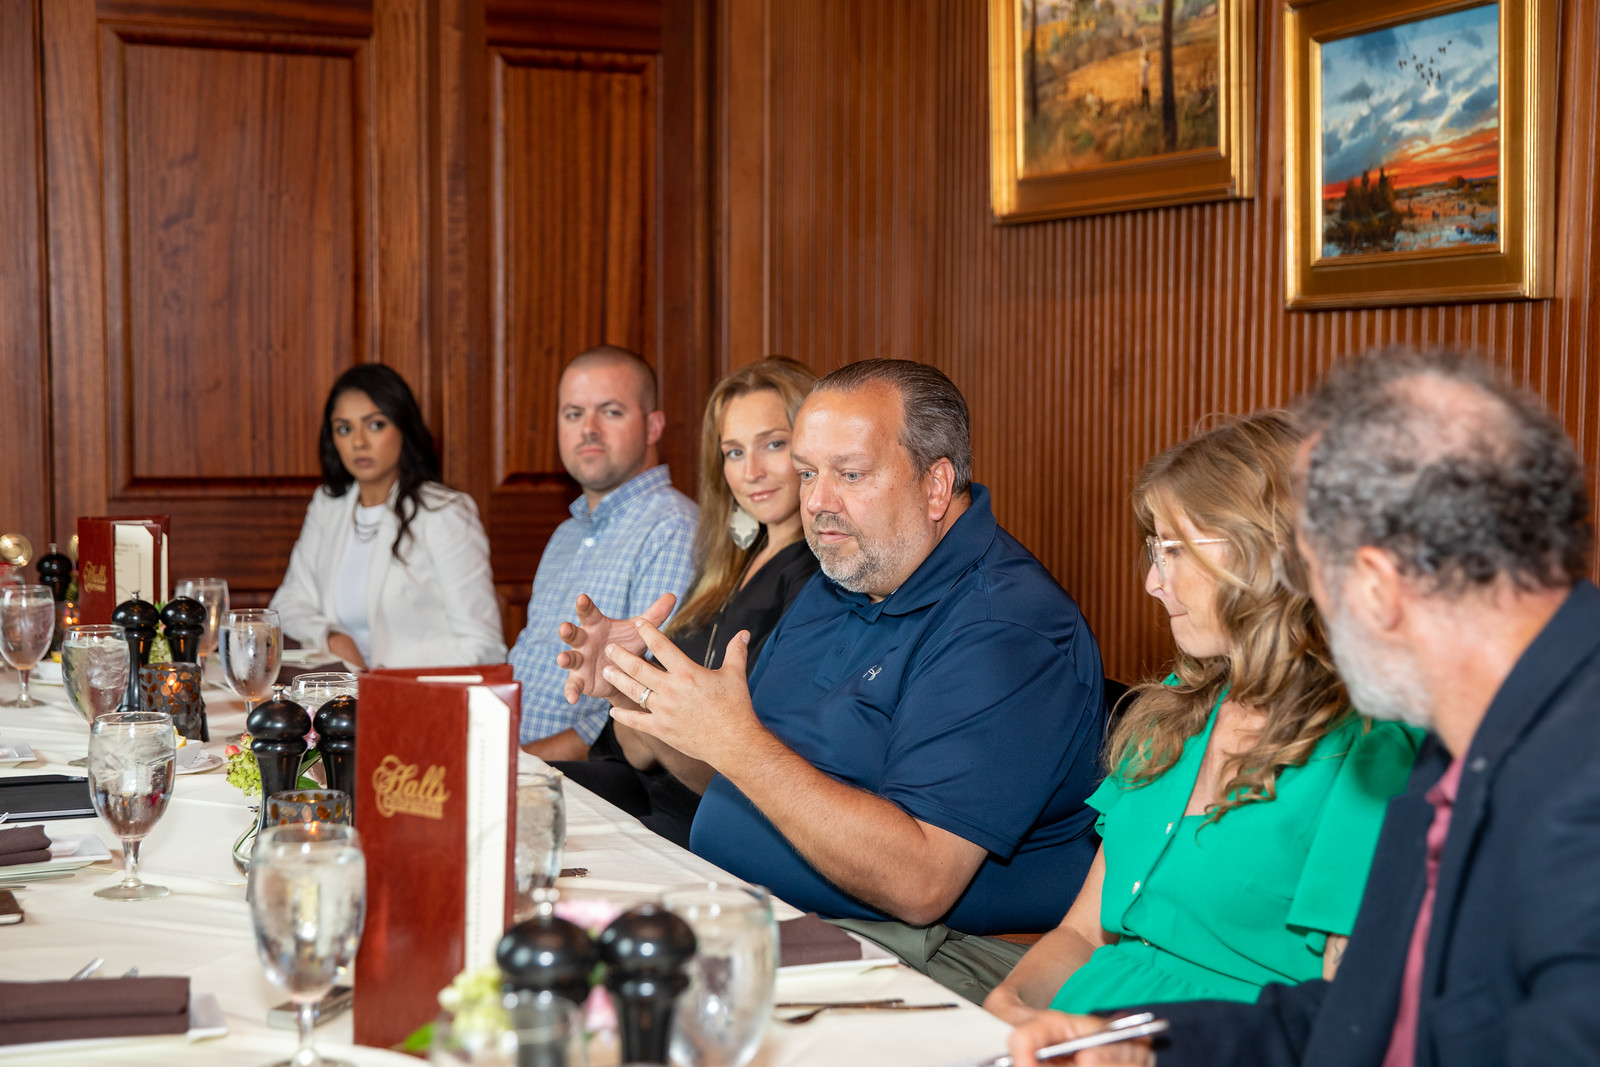 Scott Byers, CEO of Majestic Kitchen + Bath, leads a discussion about the residential housing sector with a group of homebuilders and suppliers recently in Charleston. (Photo/Kim McManus)